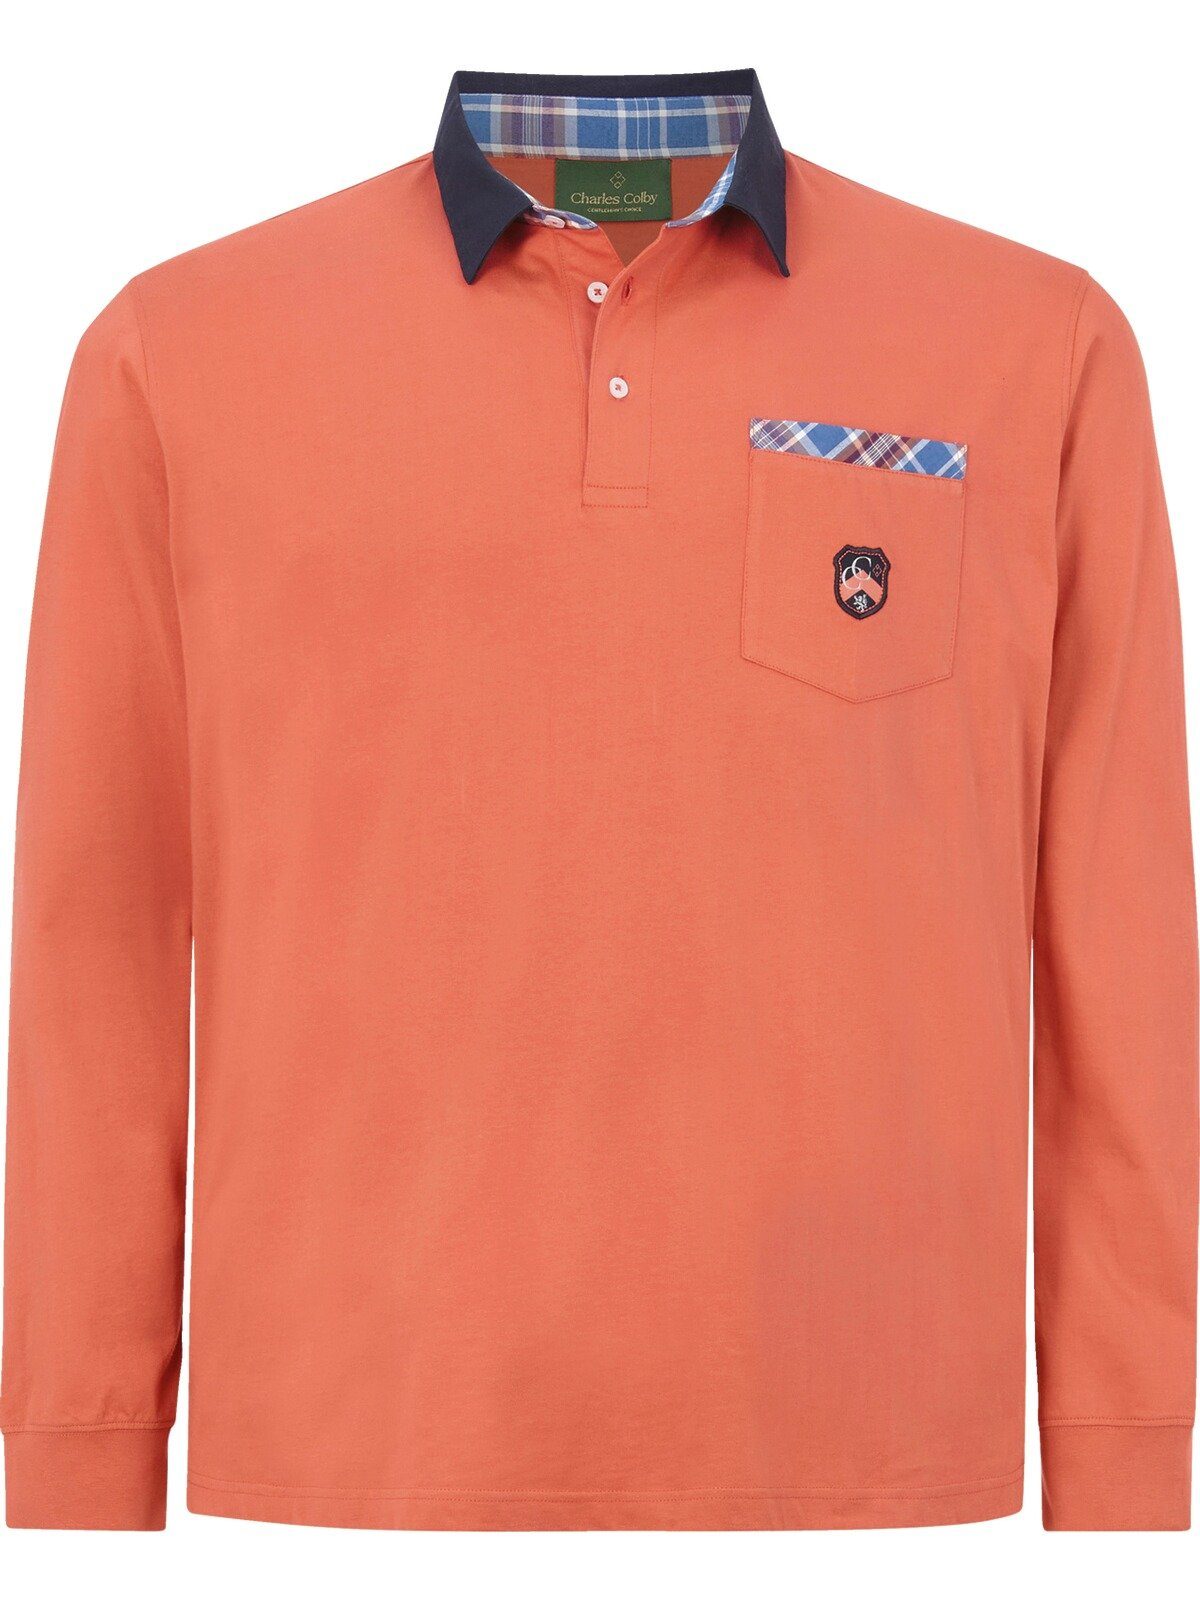 in EARL leichter Langarm-Poloshirt Sweat-Qualität CATHAL Colby Charles